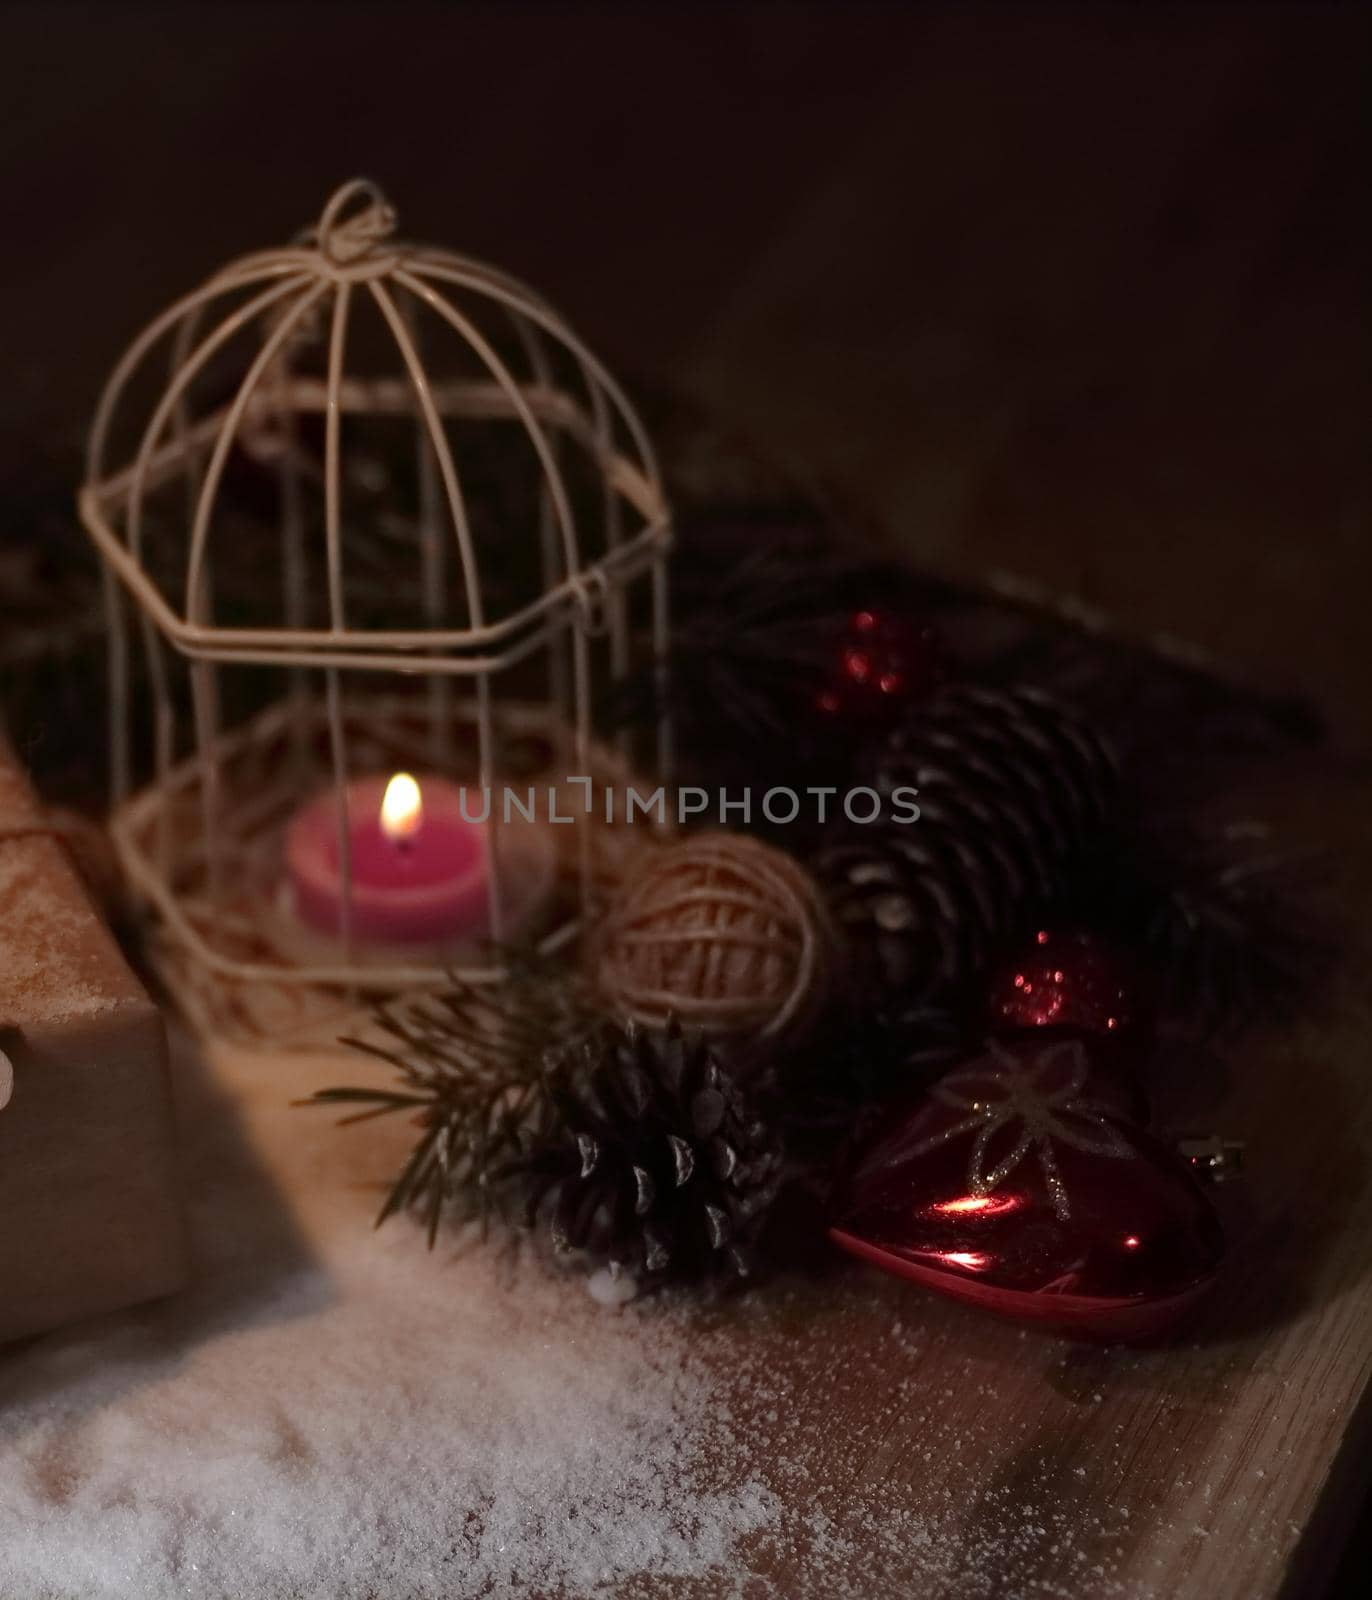 stylish Christmas composition on wooden background. photo with copy space